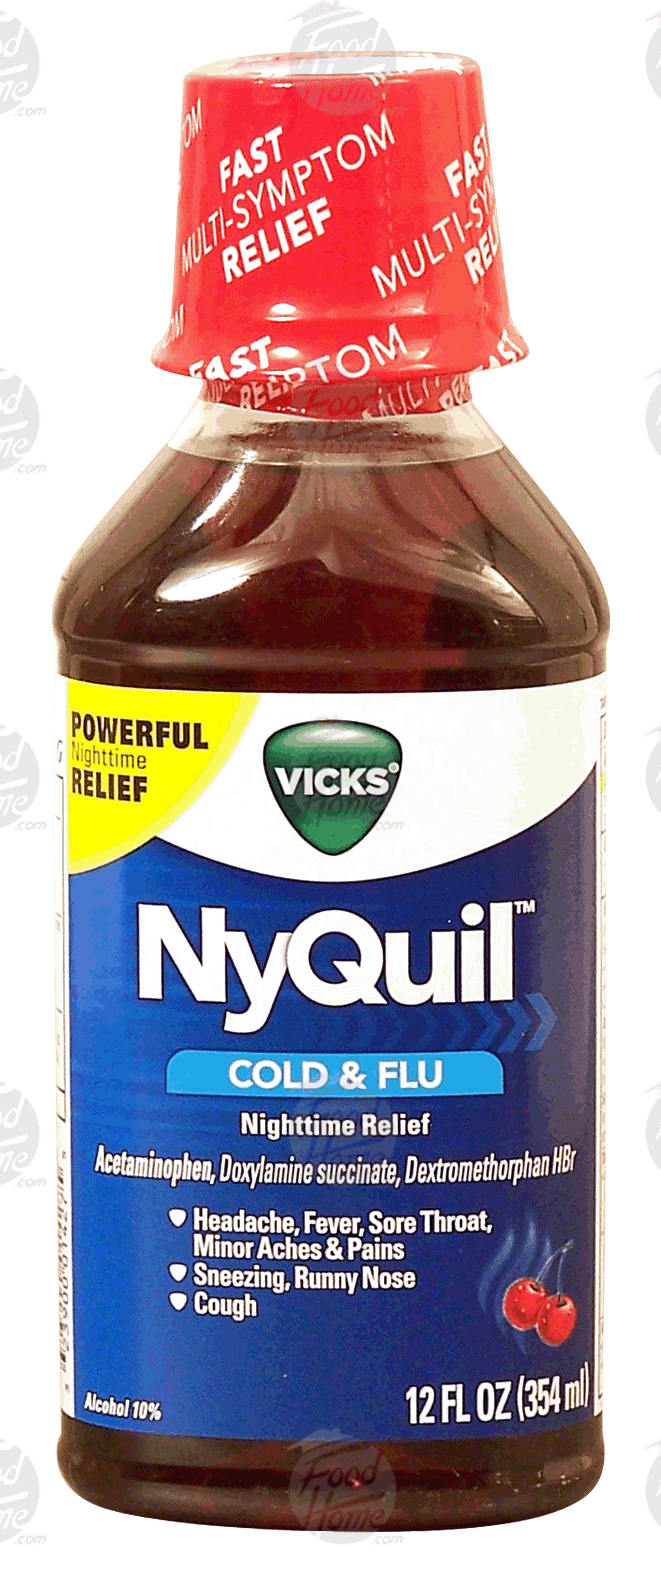 Vicks NyQuil cold & flu nighttime relief, cherry Full-Size Picture